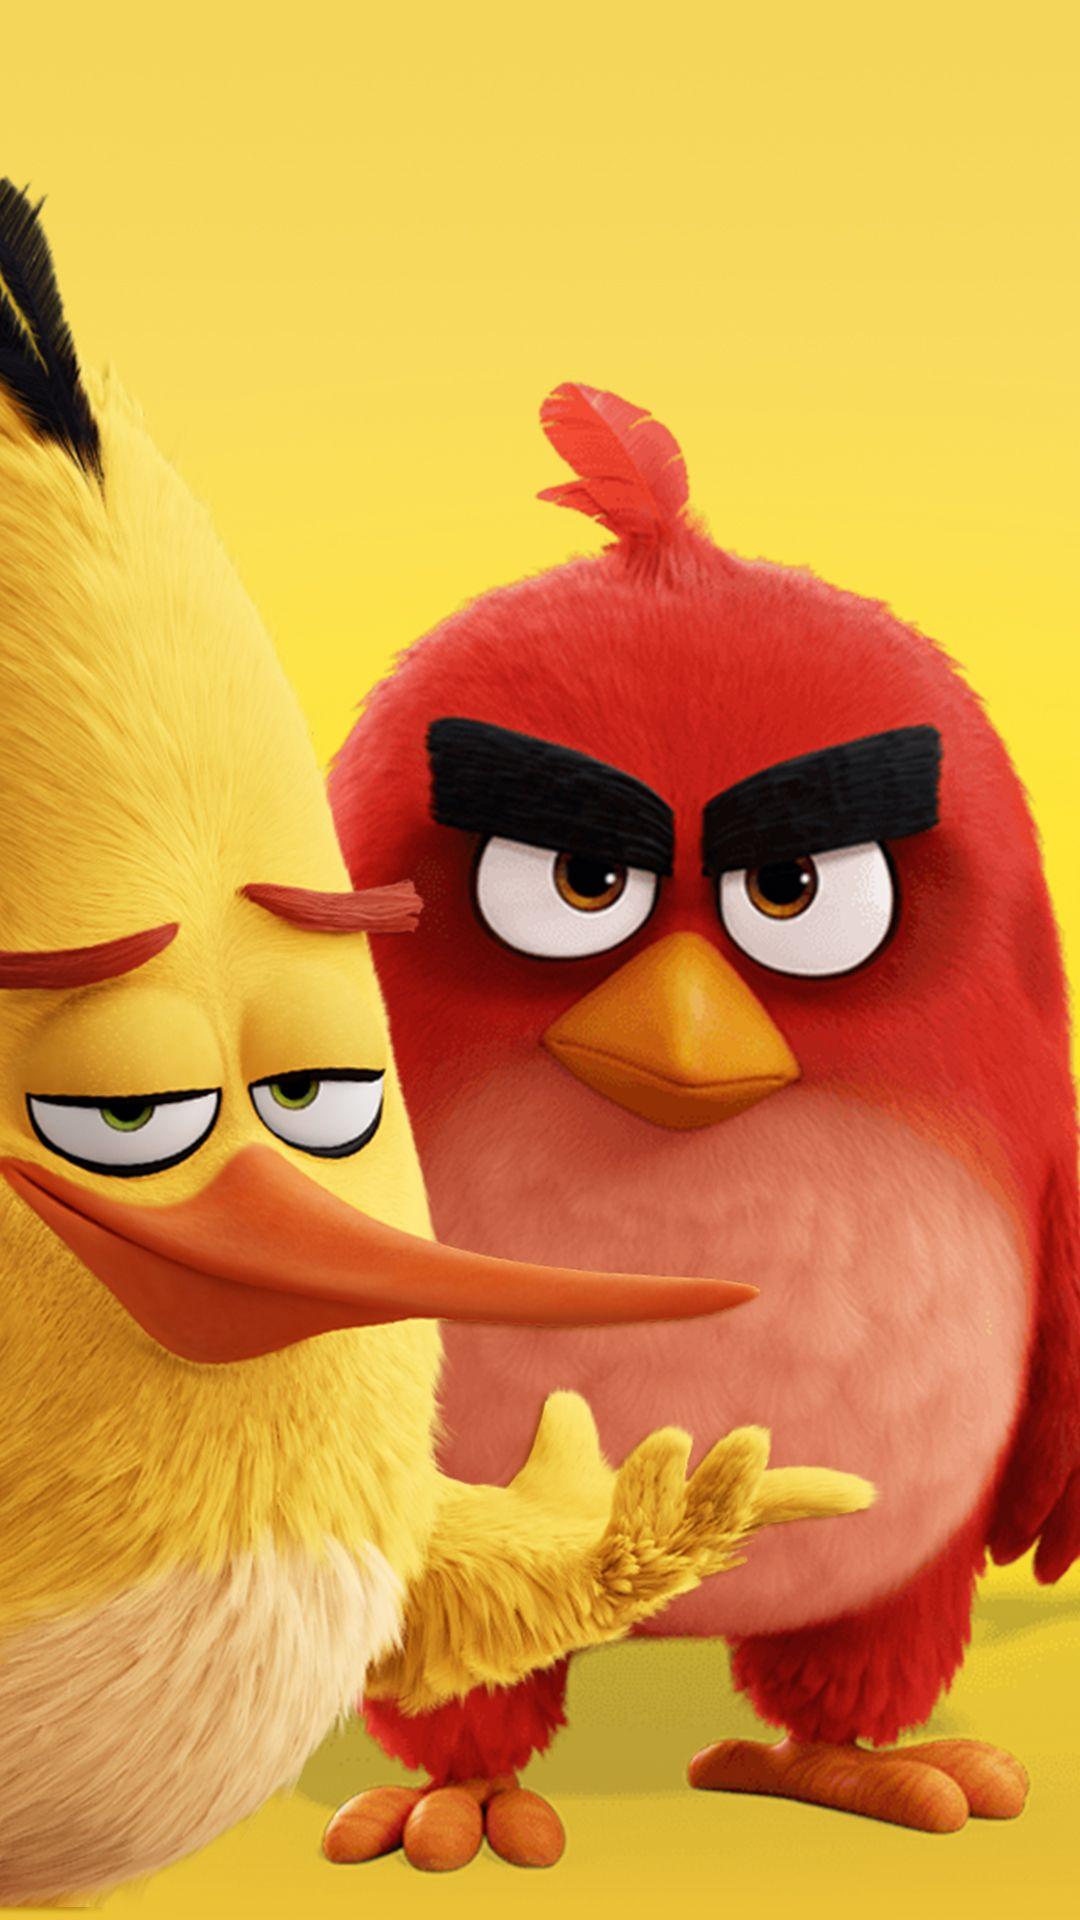 Wallpaper Angry Birds 3d Image Num 67